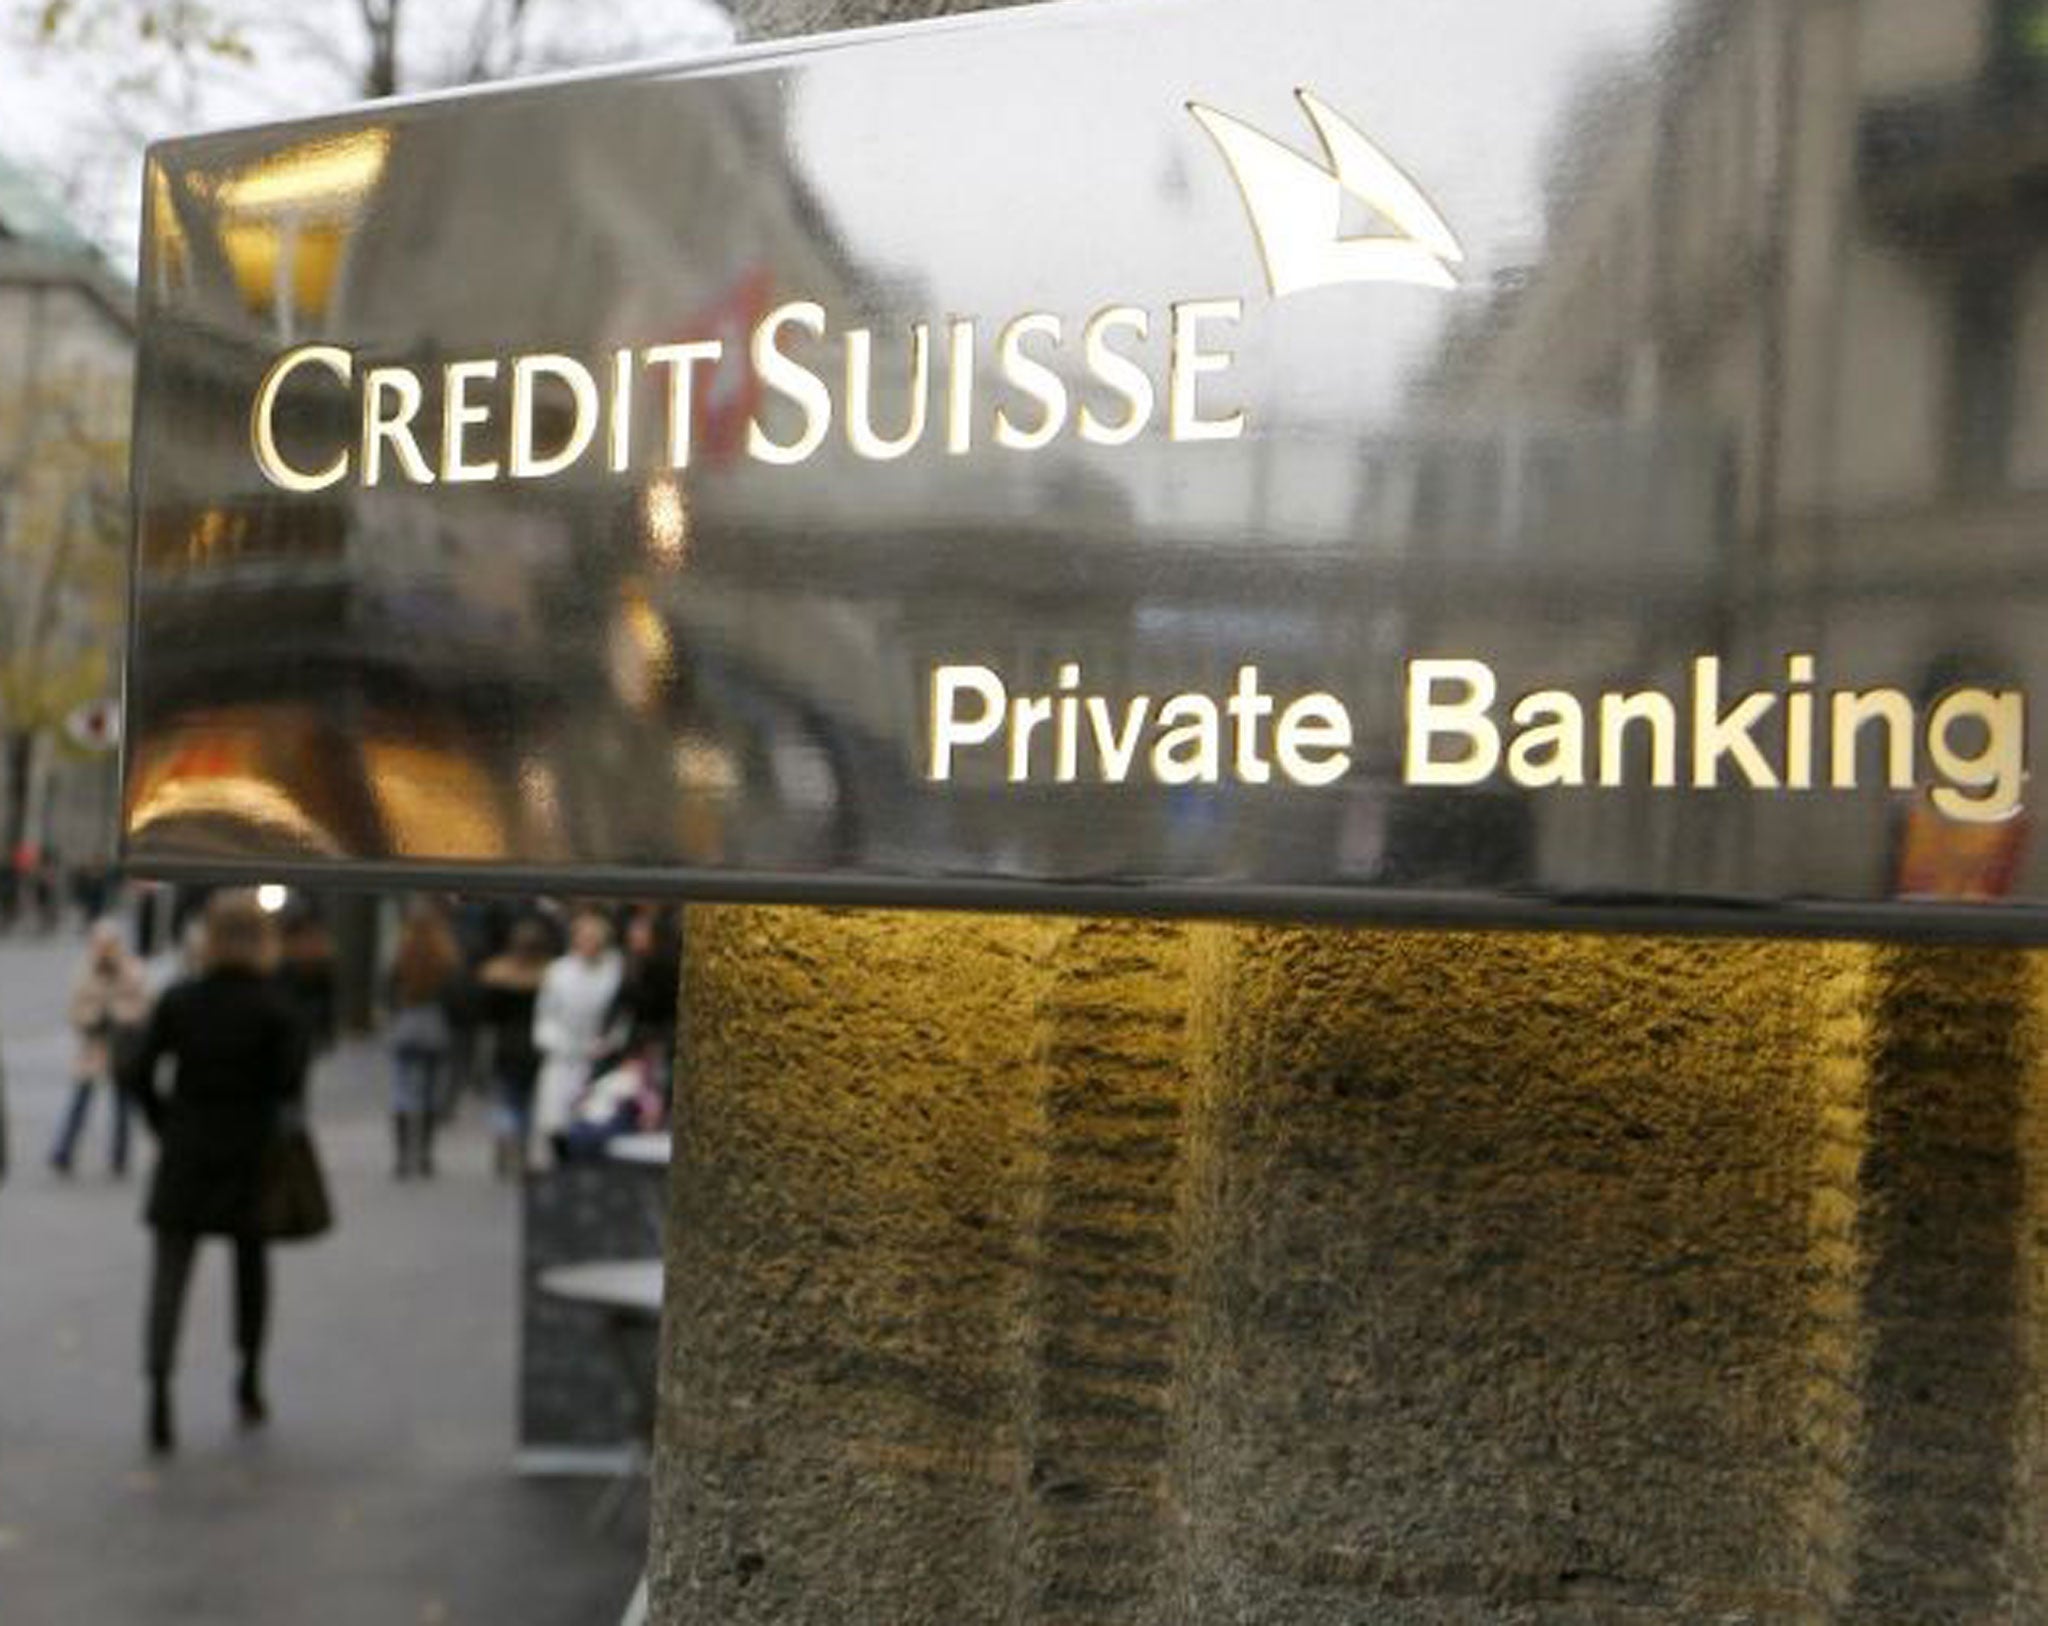 In a letter to shareholders on Friday, Mr Thiam wrote: 'My highest priority is to see through the turnaround of Credit Suisse which is under way'